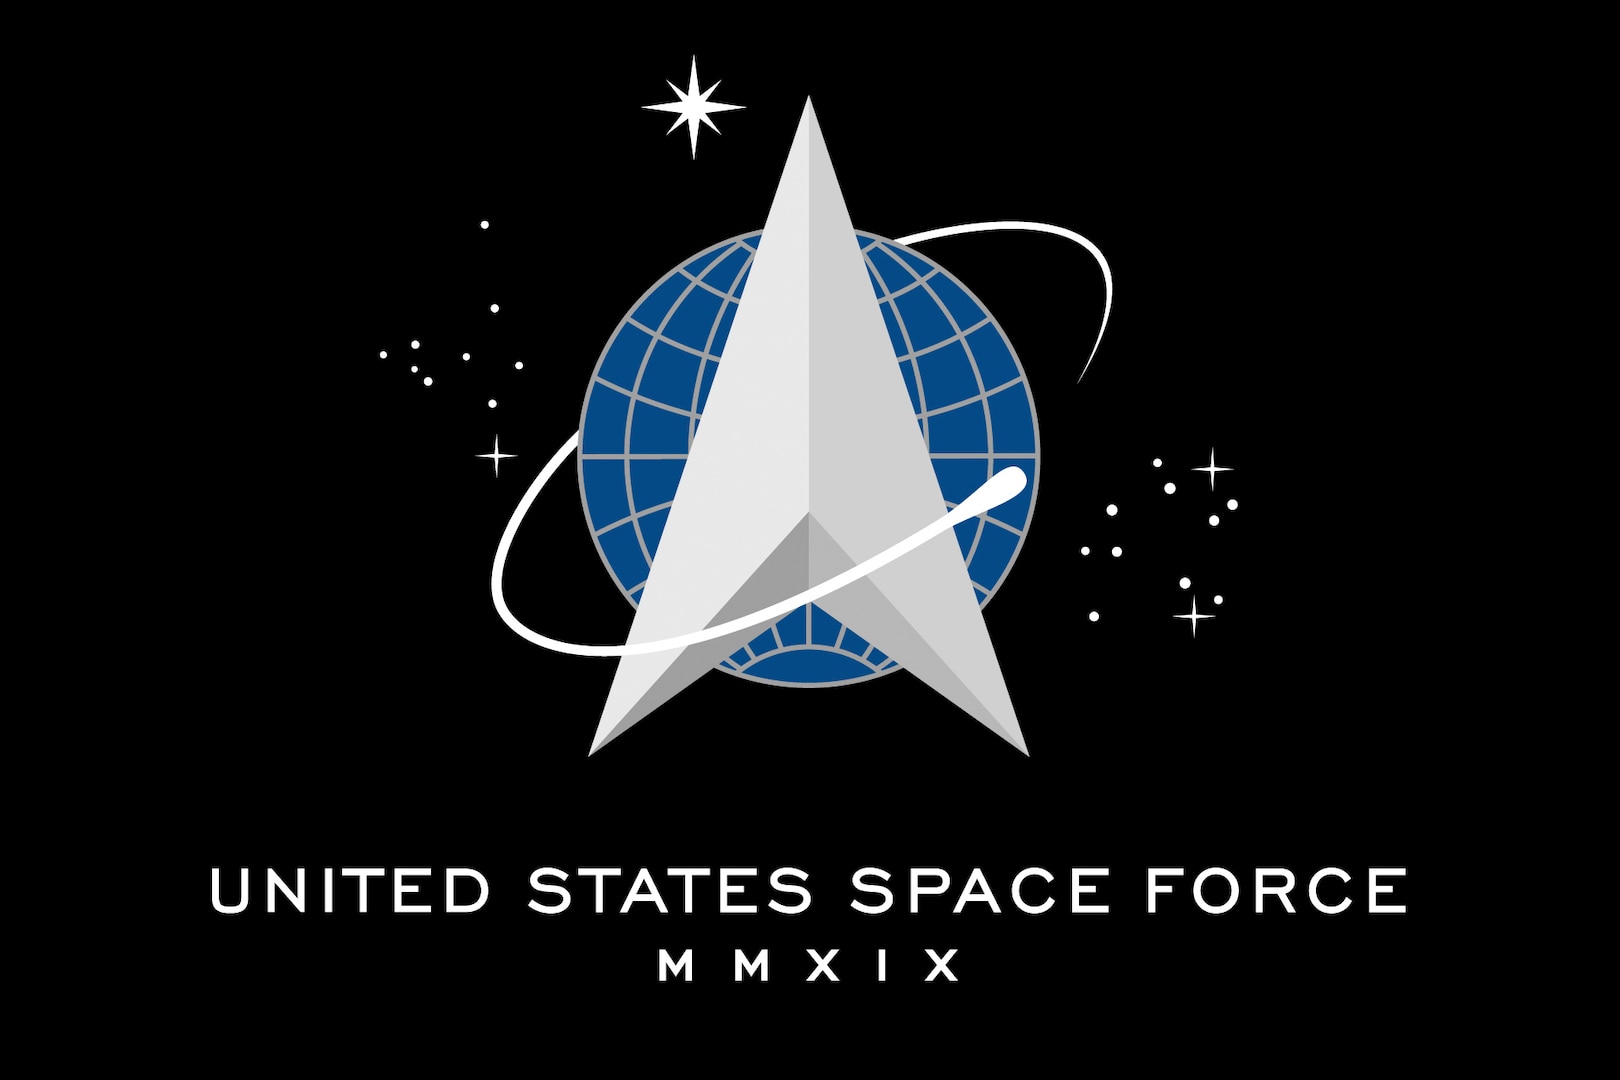 Space Force Focuses on Partnerships, Spirit, Combat Readiness